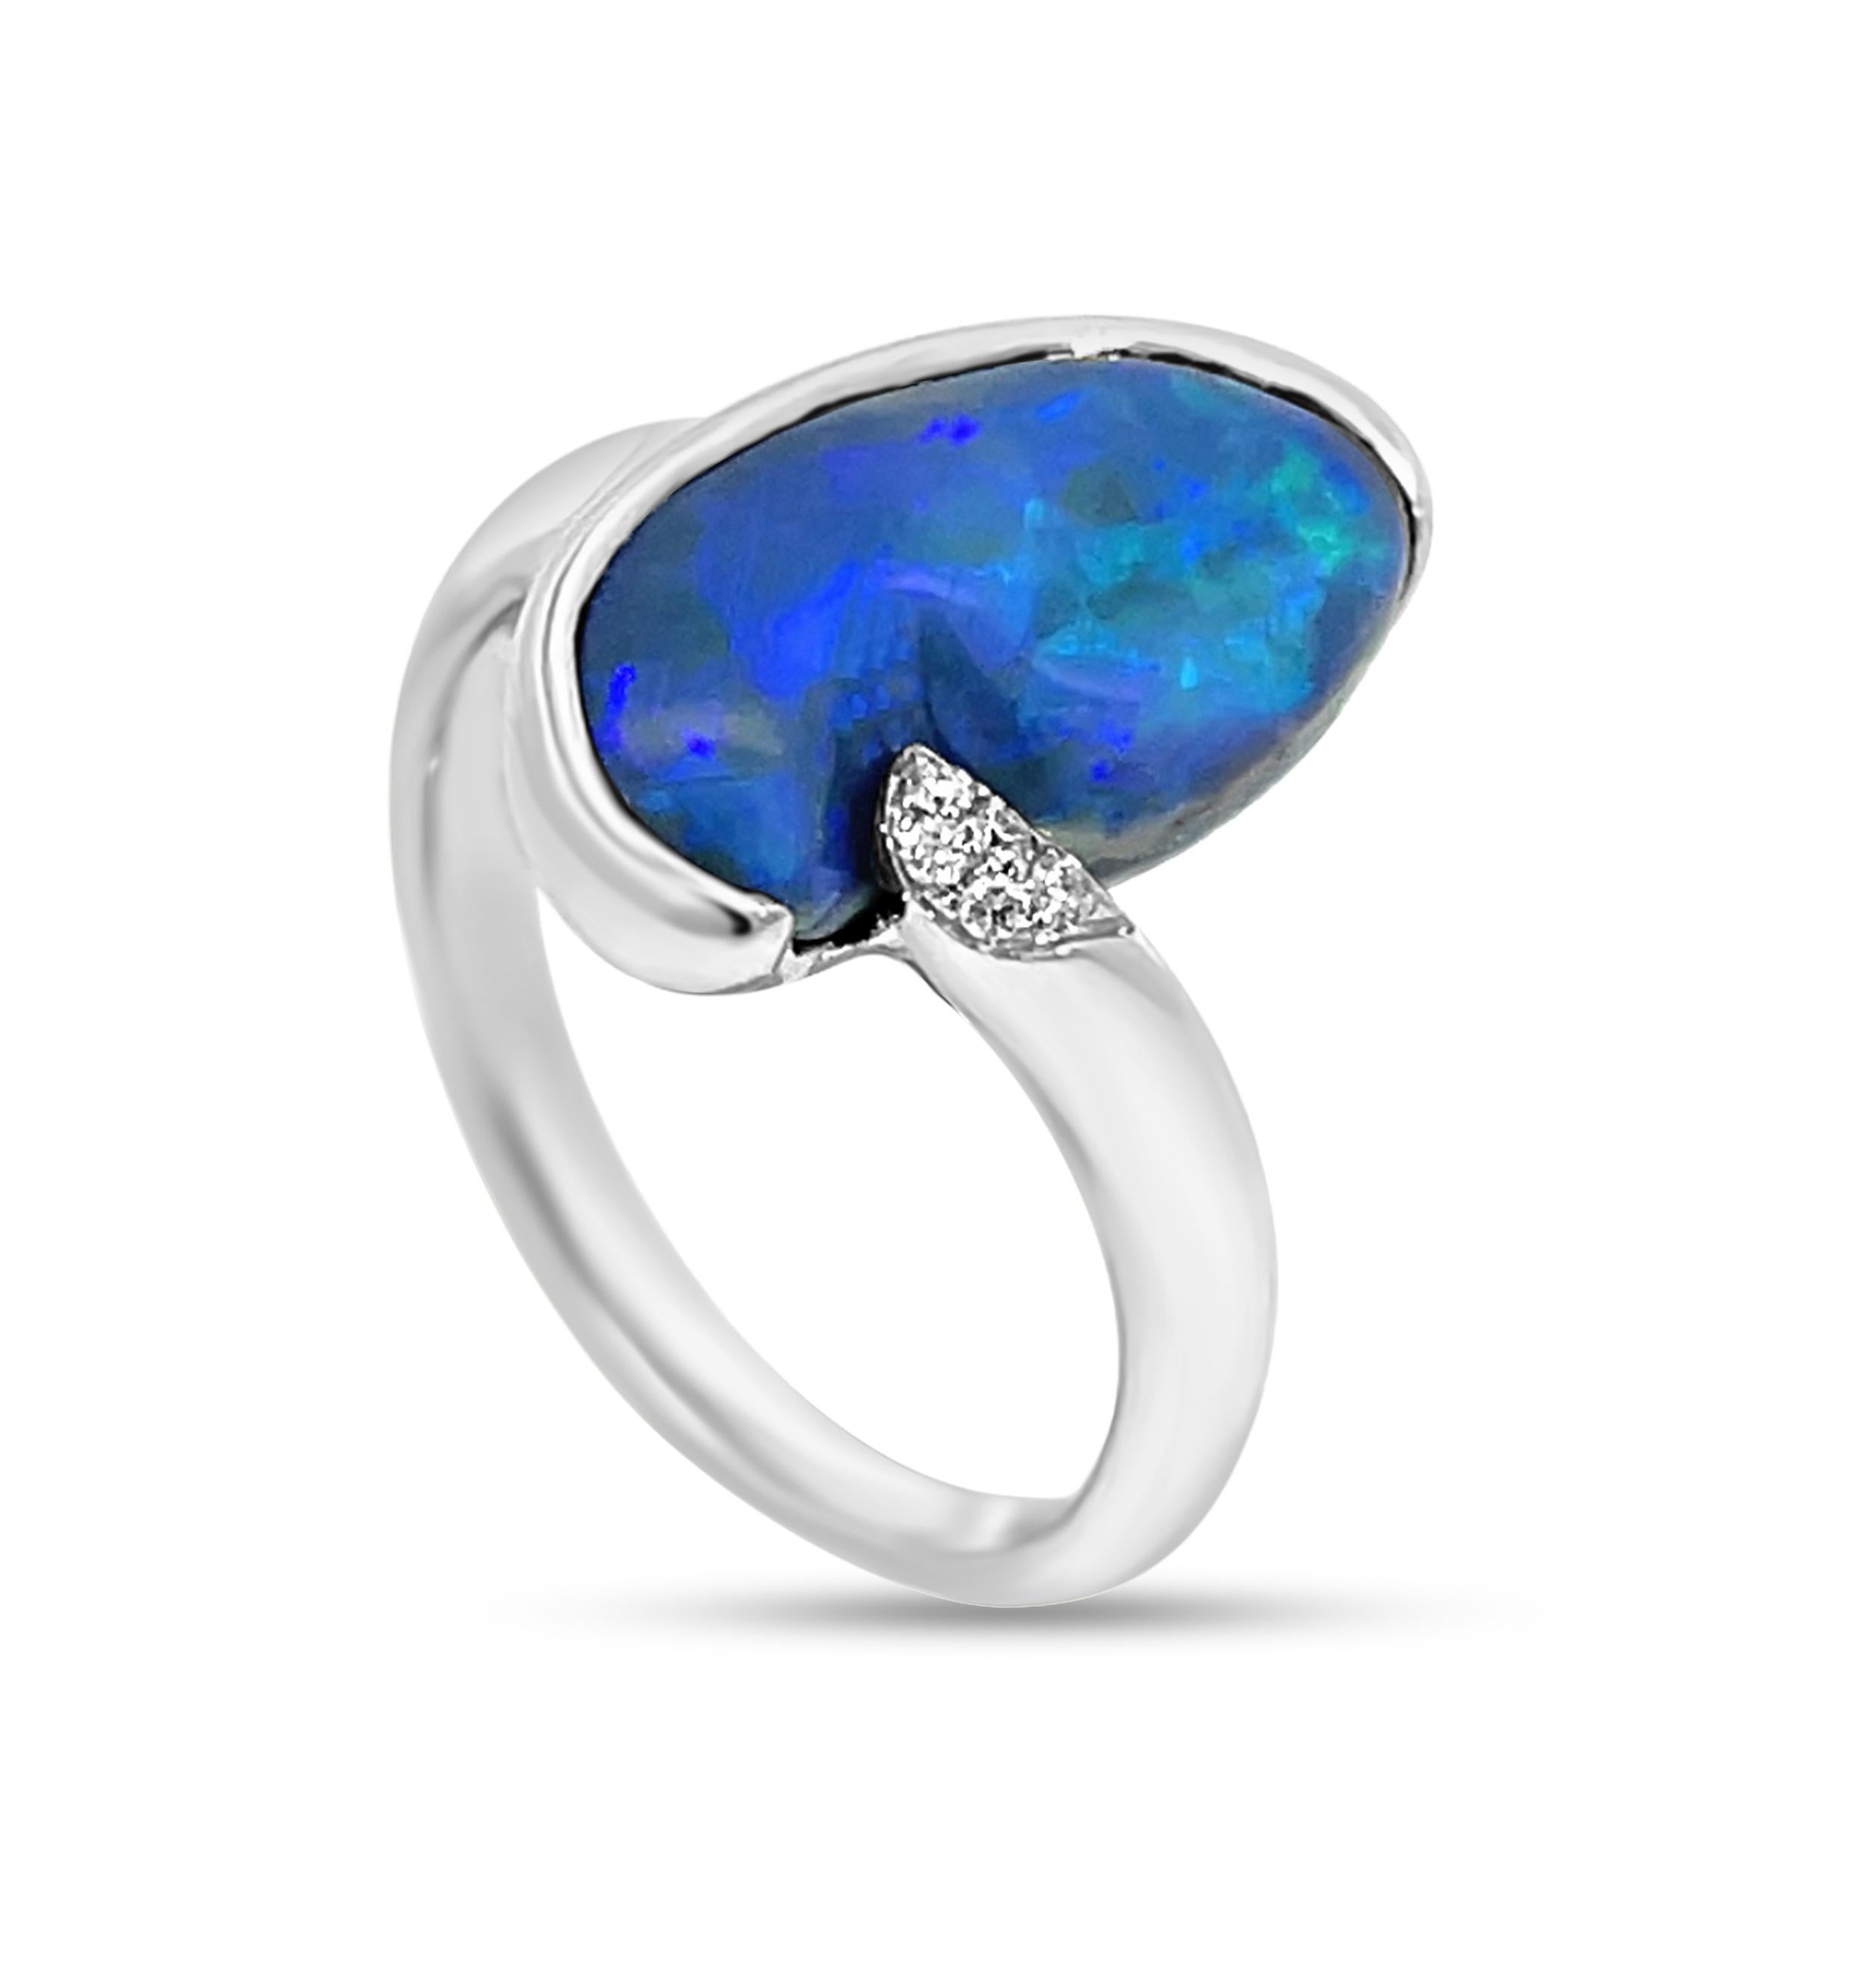 Contemporary Solid Natural Untreated Australian 3.85ct Black Opal Ring in 18k White Gold 